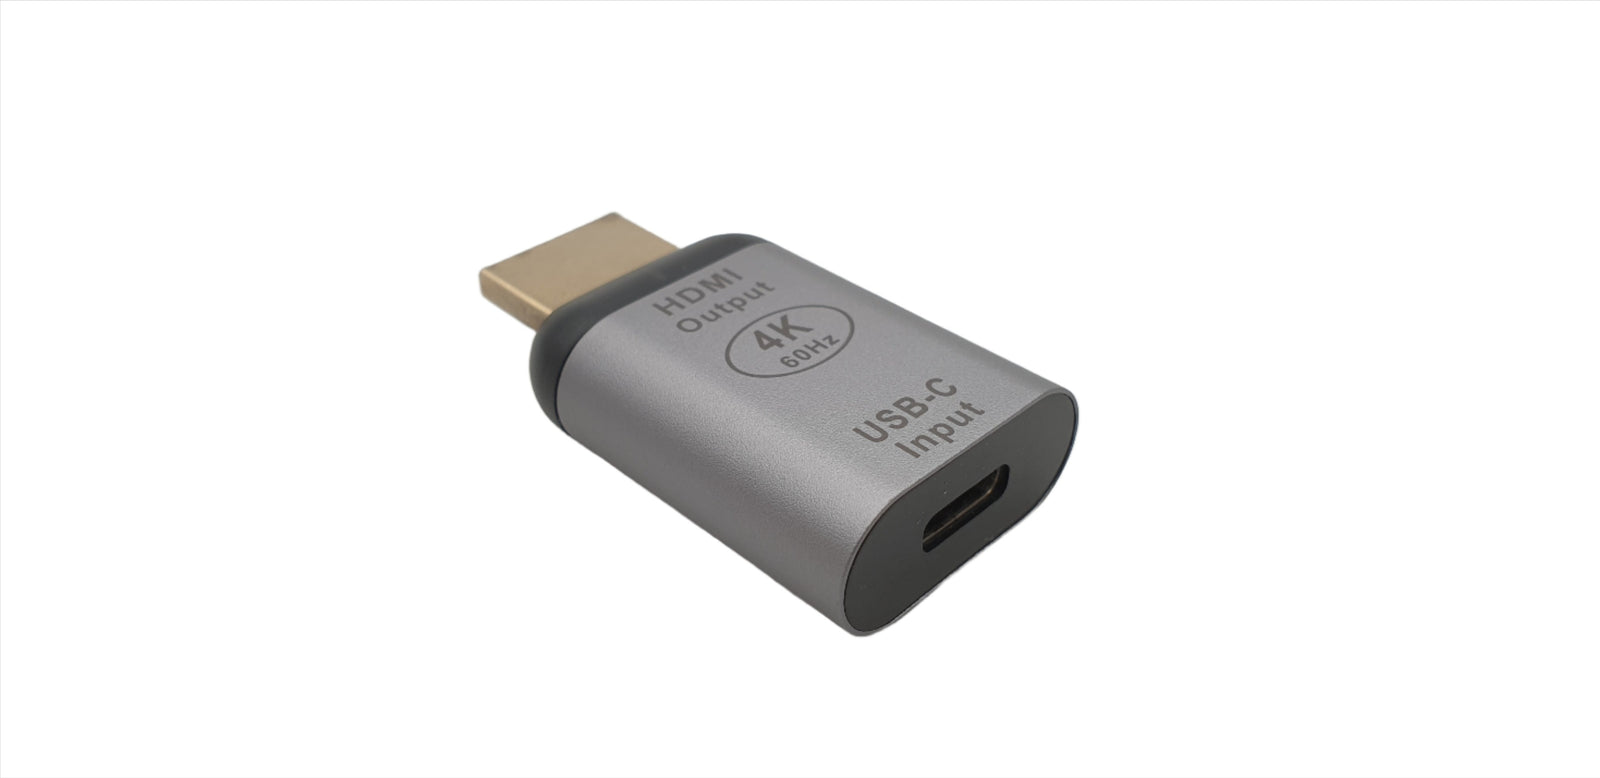 USB Type C 3.1 Gen2 to HDMI2.0 adapter